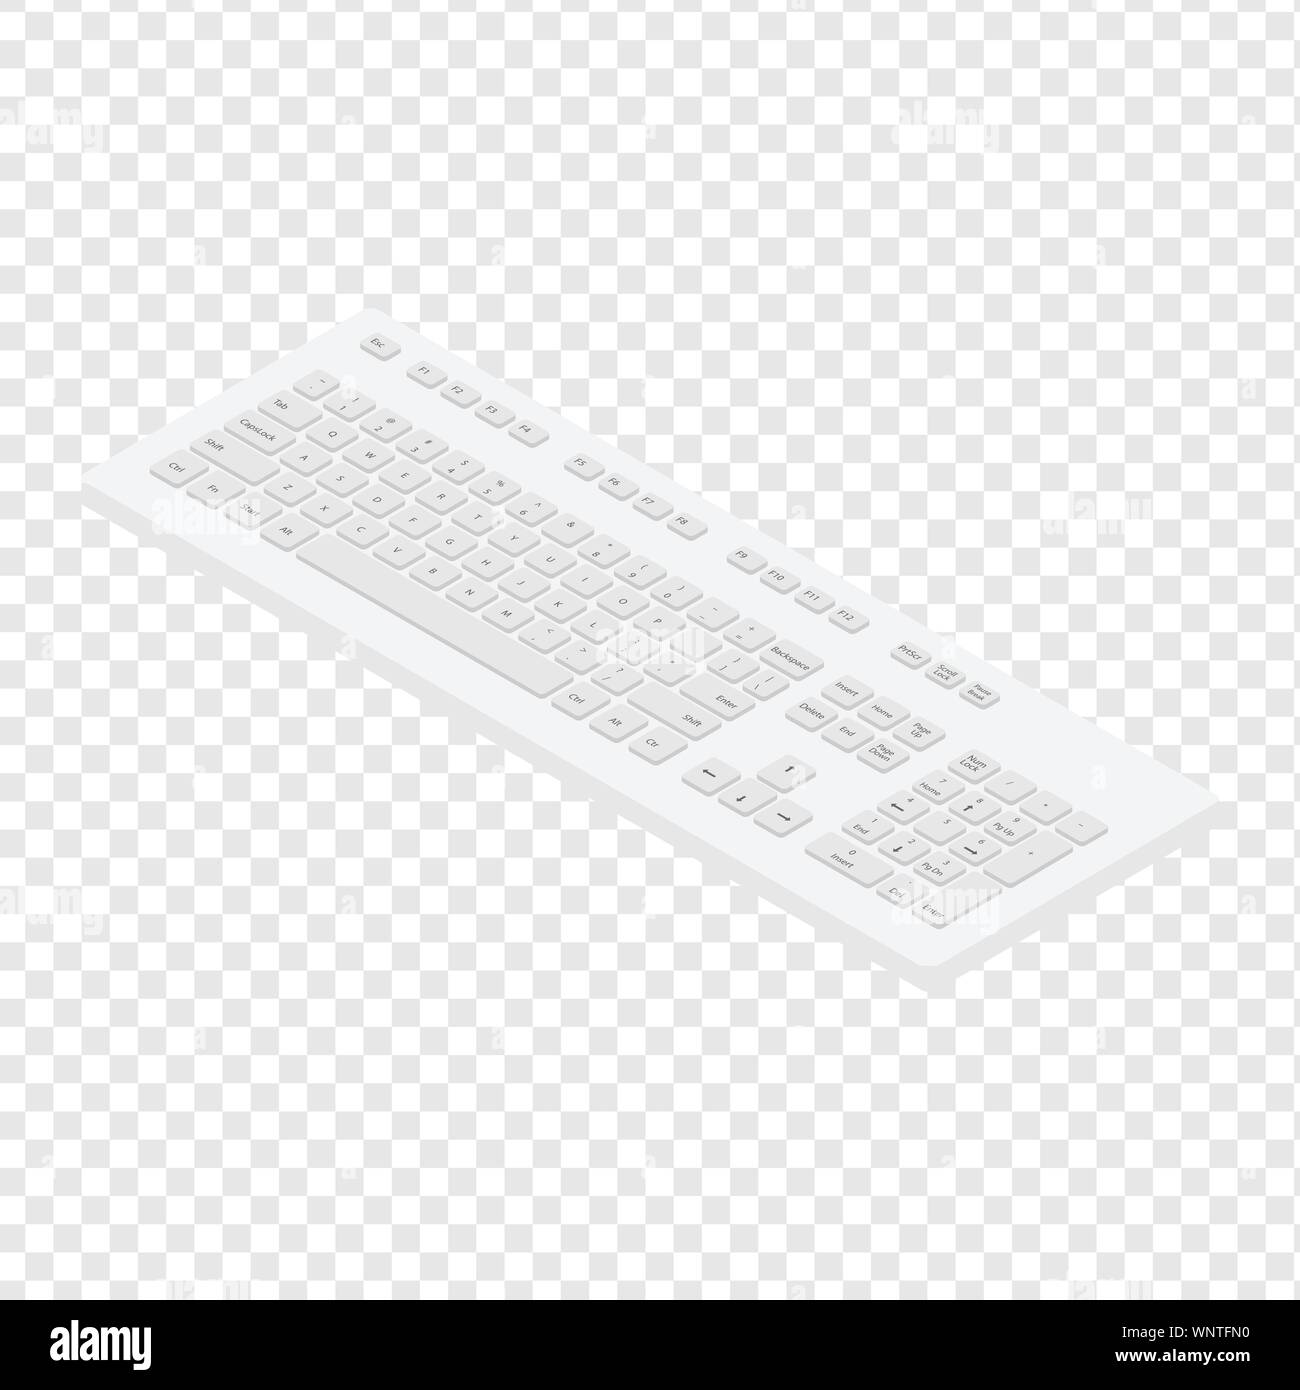 Isometric view white pc keyboard. Personal computer tool to write words Stock Vector